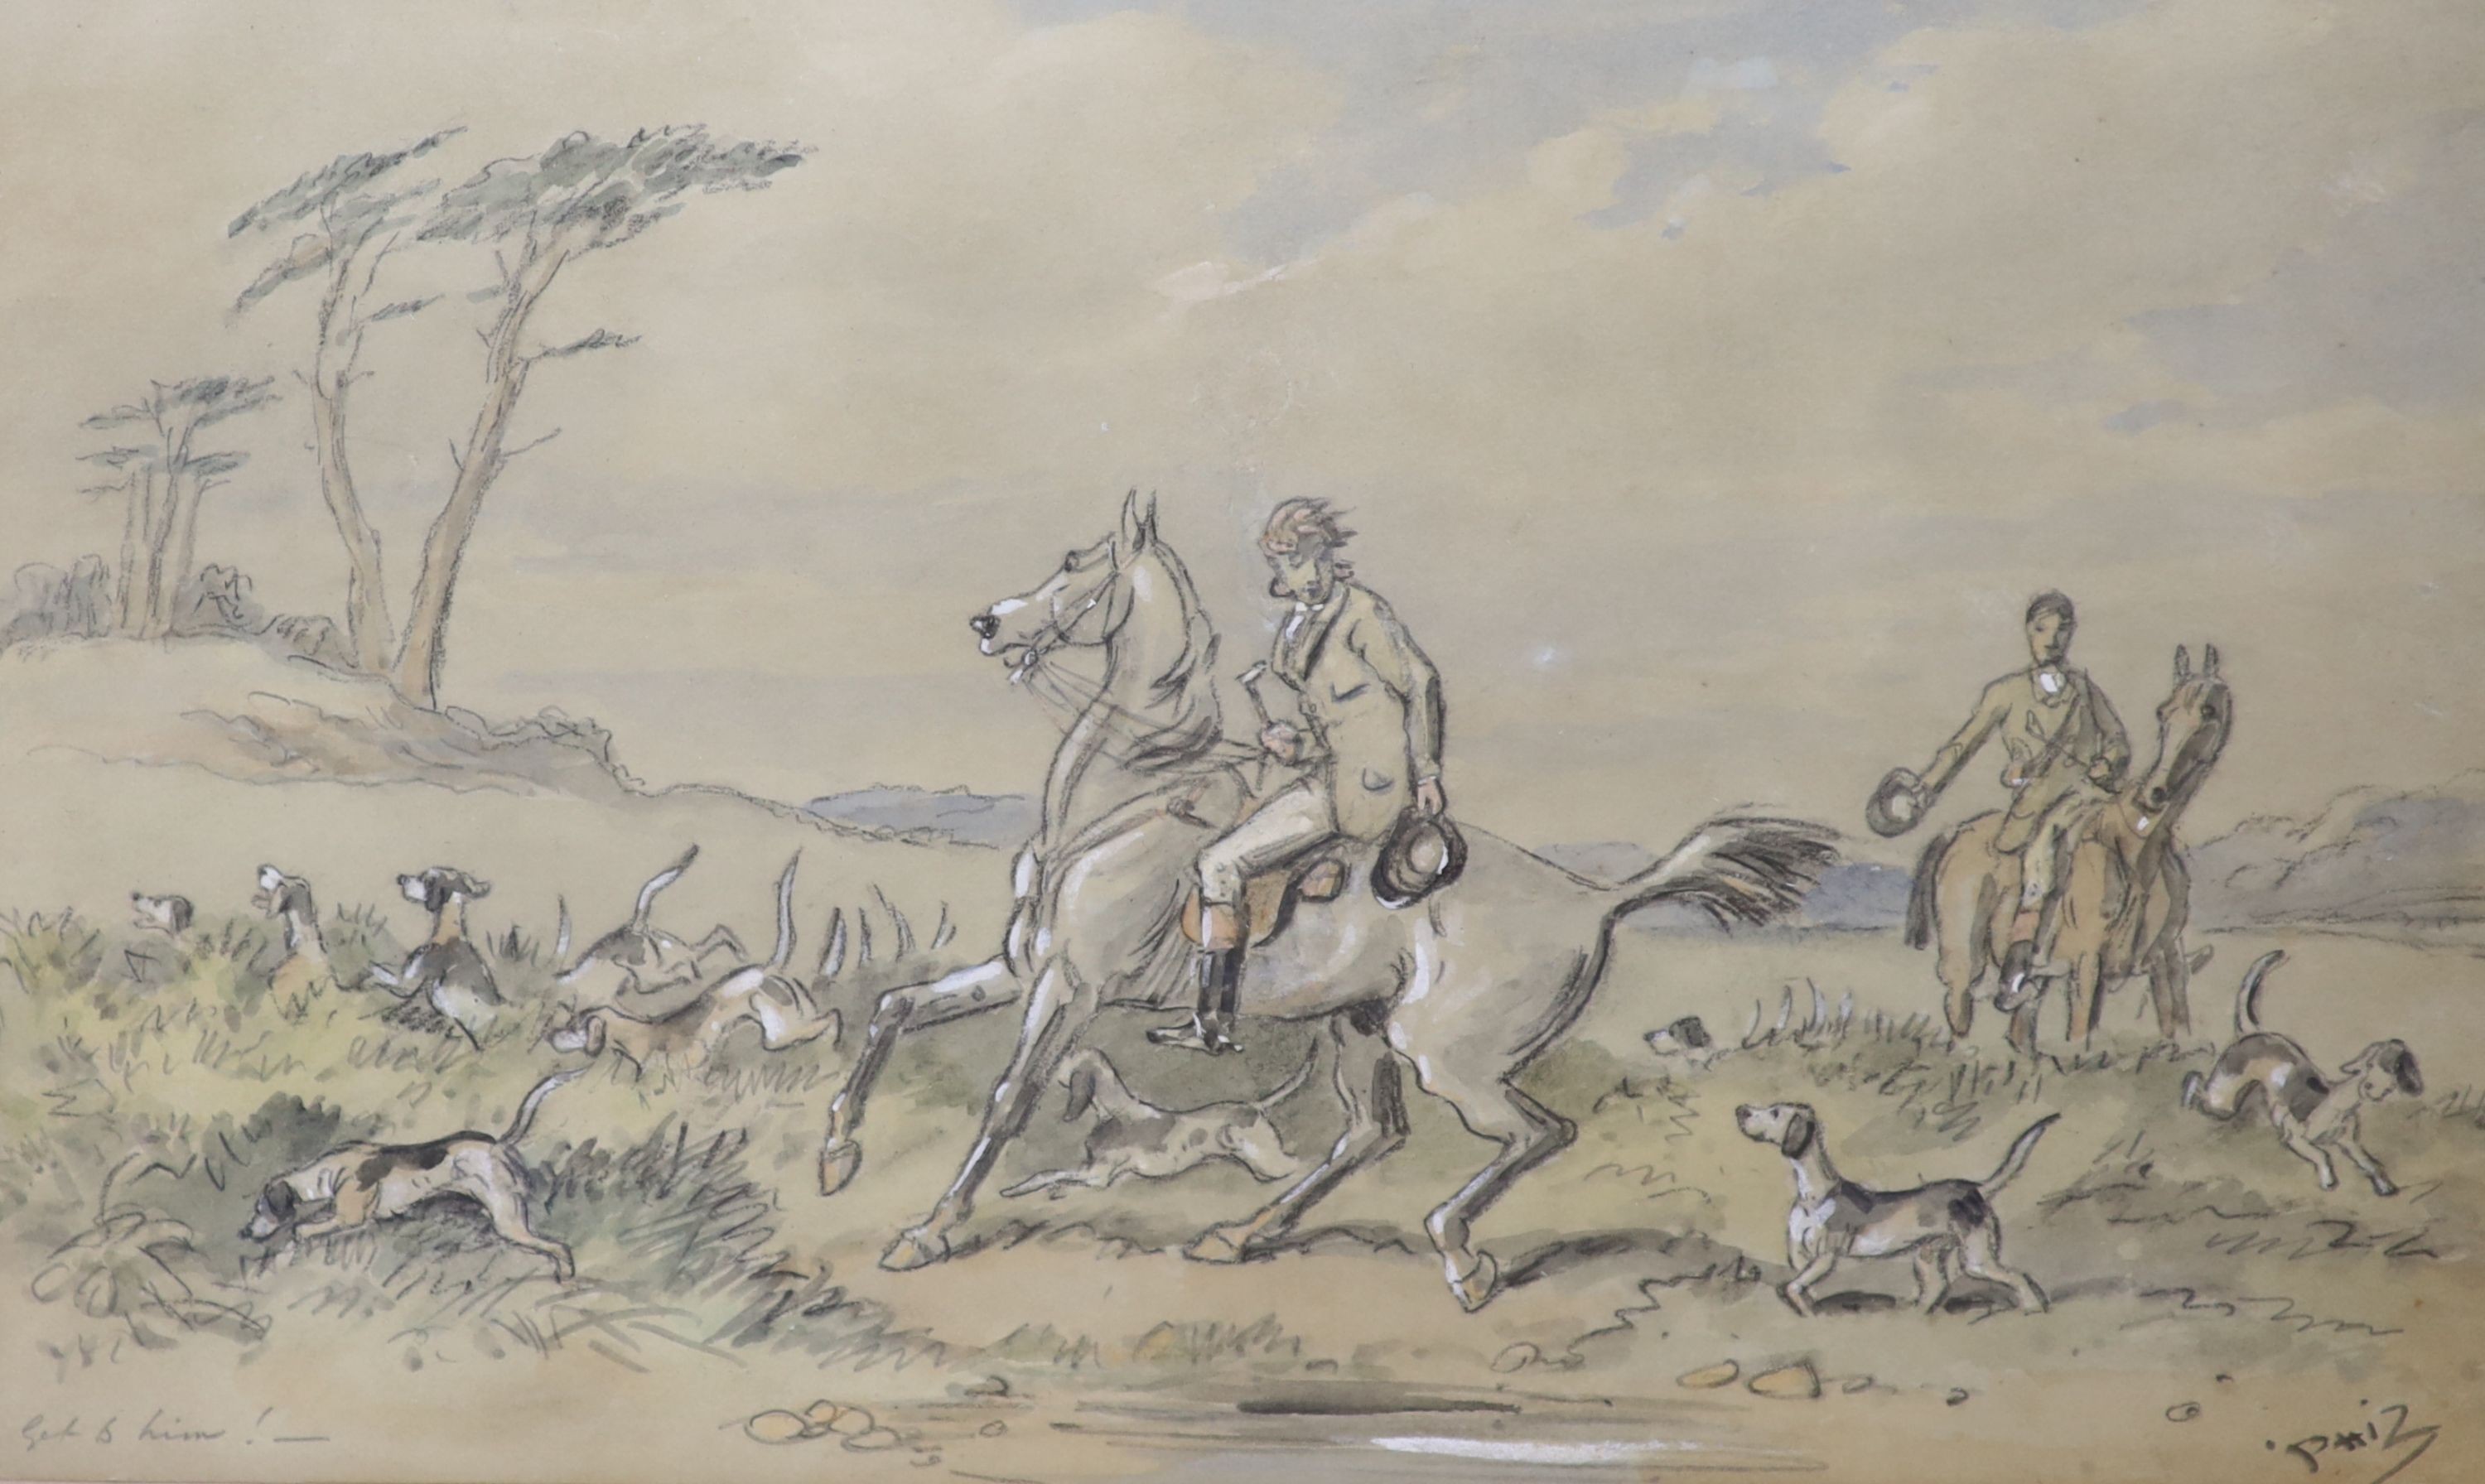 Hablot Knight Browne (1815-1882) 'Phiz', charcoal and watercolour, 'Get Him!', 23 x 37cm